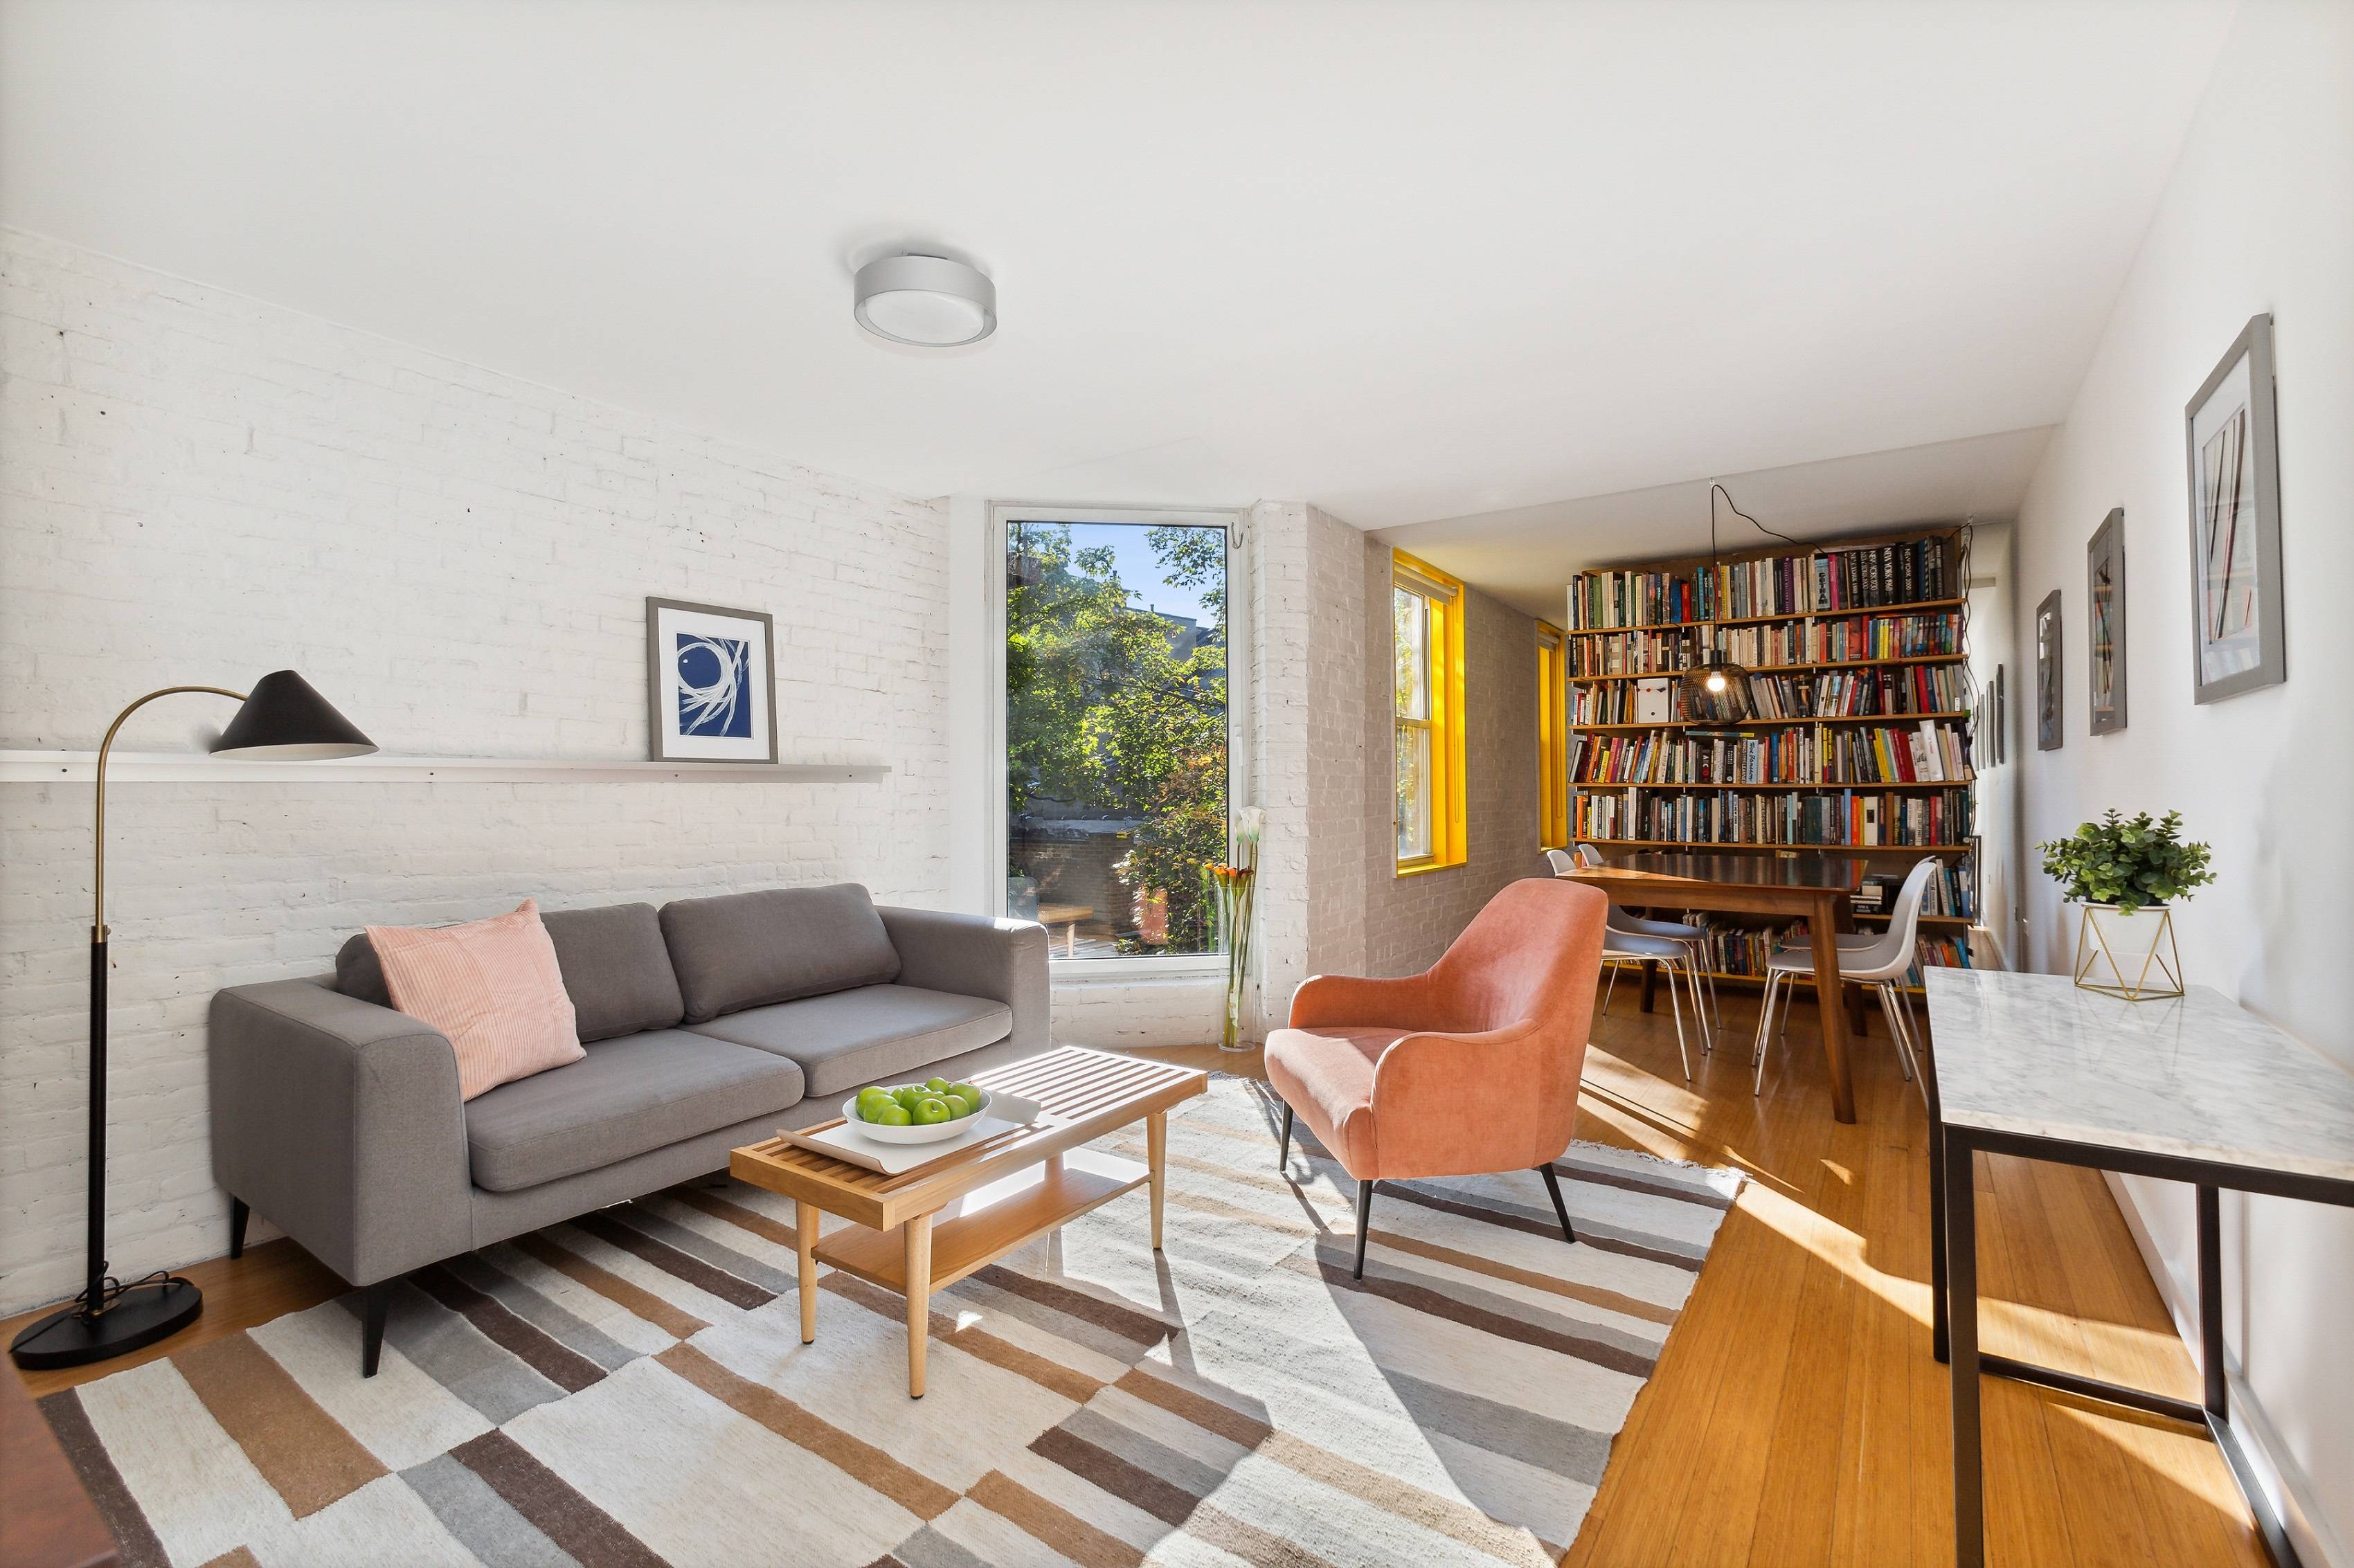 Modern Styling meets Pre war charm in this 4th Floor light and airy one bedroom apartment on a tree lined street in historic Brooklyn Heights.